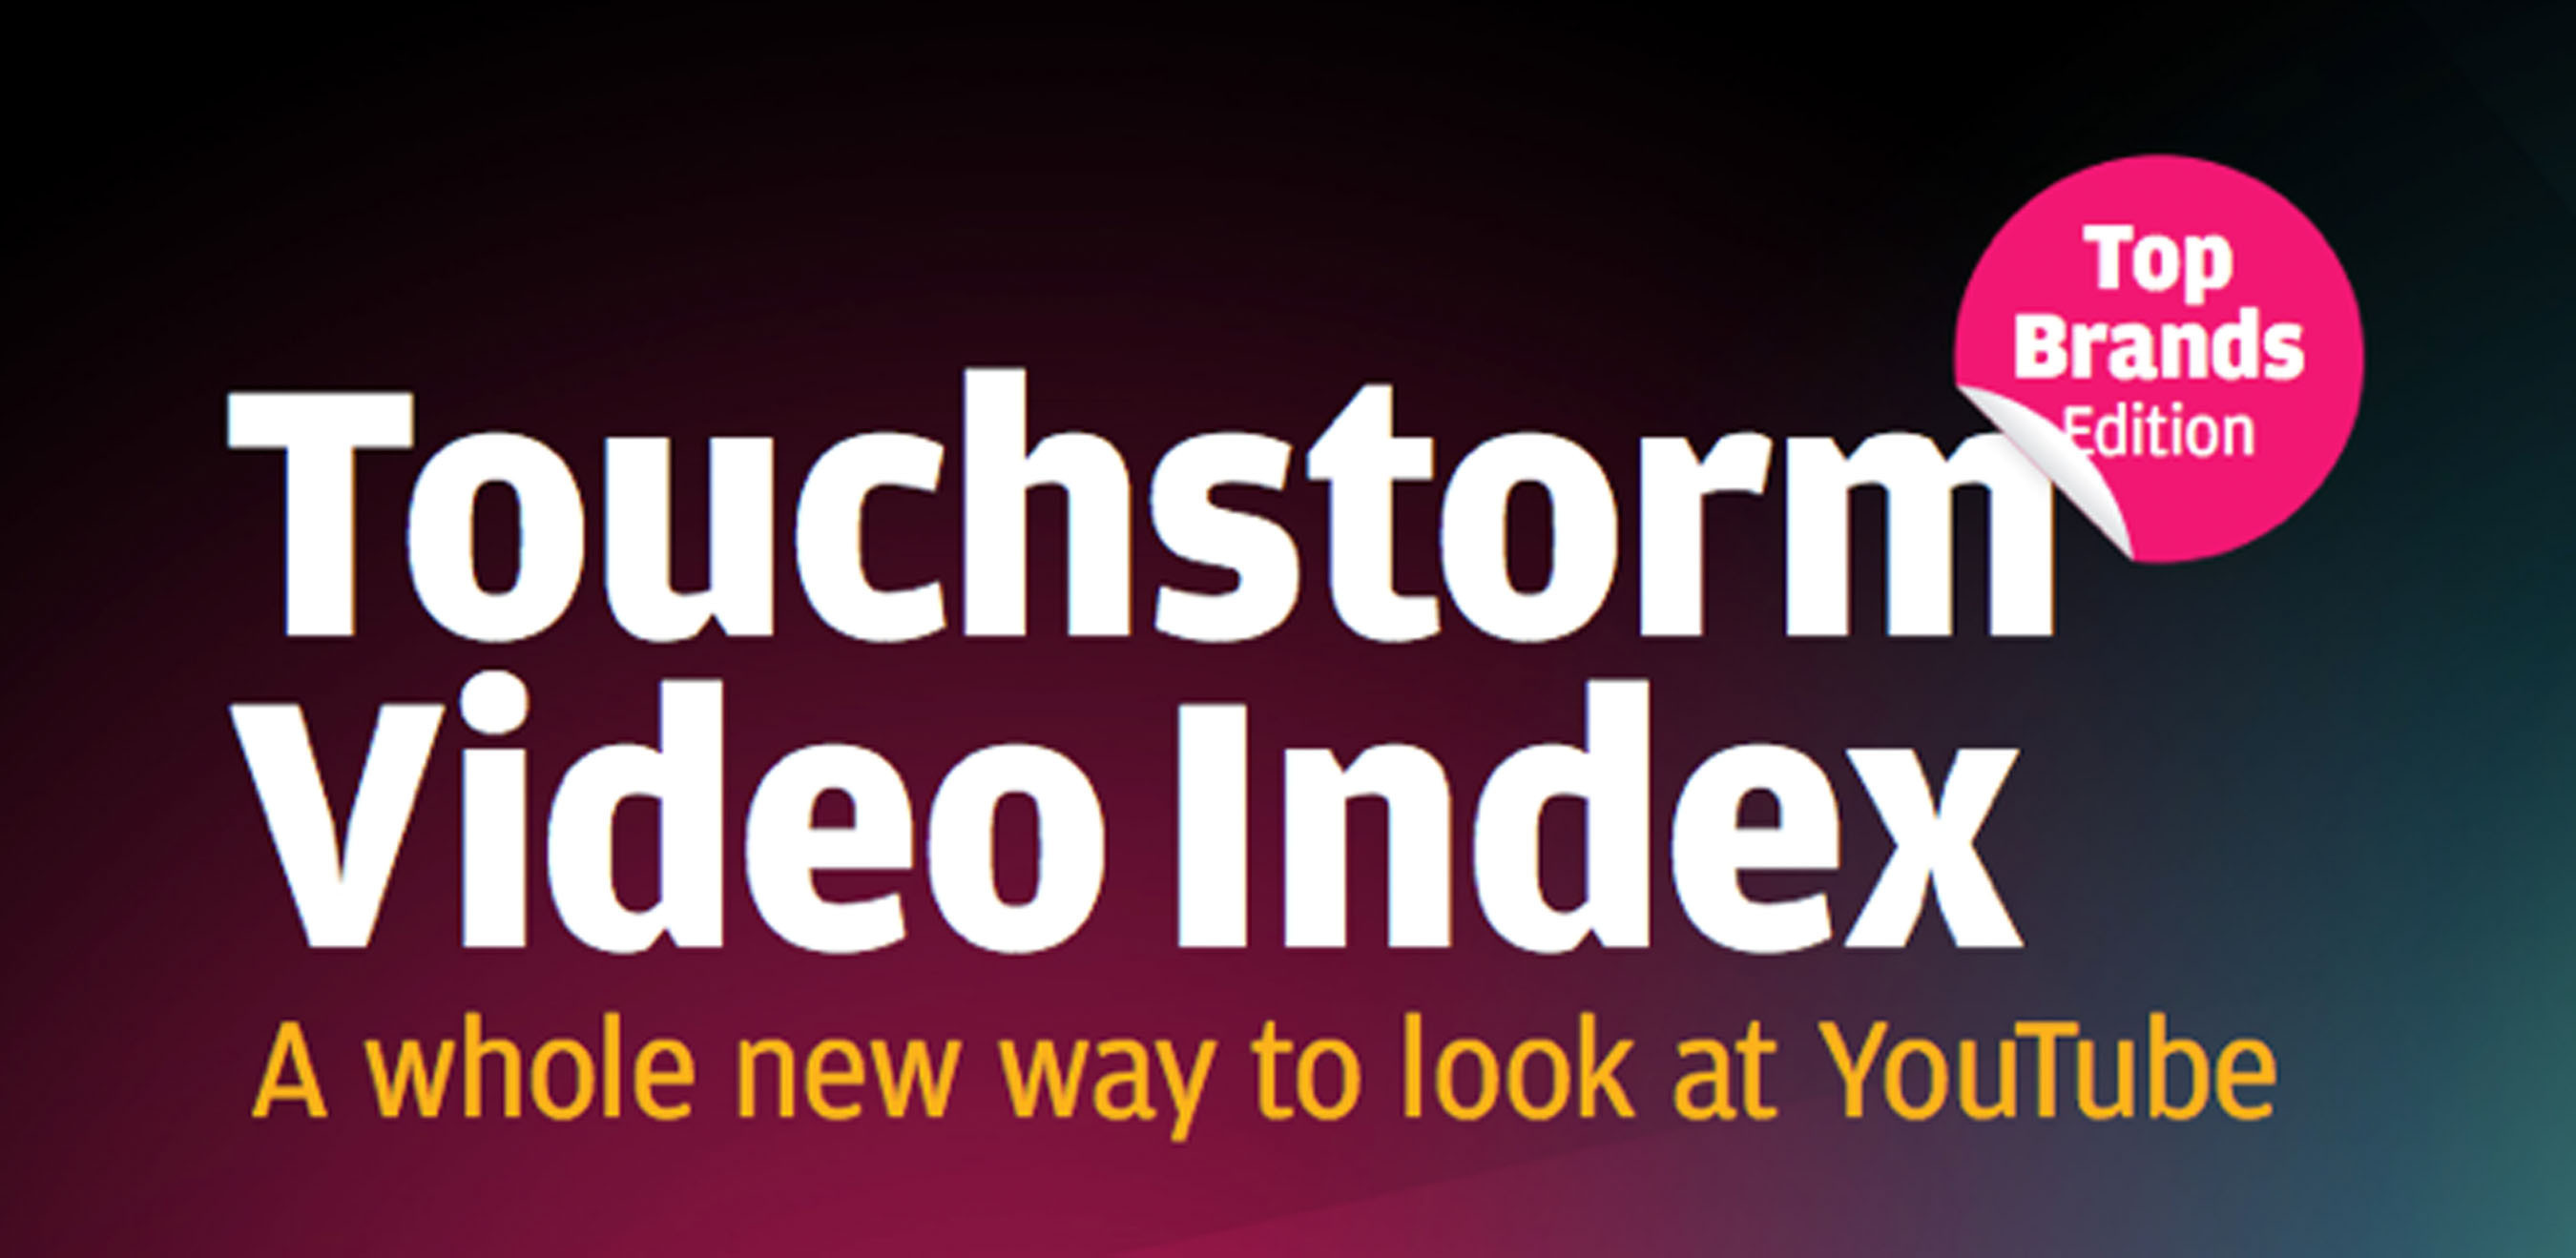 Only 74 brands rank among the top 5,000 YouTube publishers in the 'Touchstorm Video Index: Top Brands Edition'; first comprehensive analysis of brand success on the world's largest online video stage. (PRNewsFoto/Touchstorm) (PRNewsFoto/TOUCHSTORM)